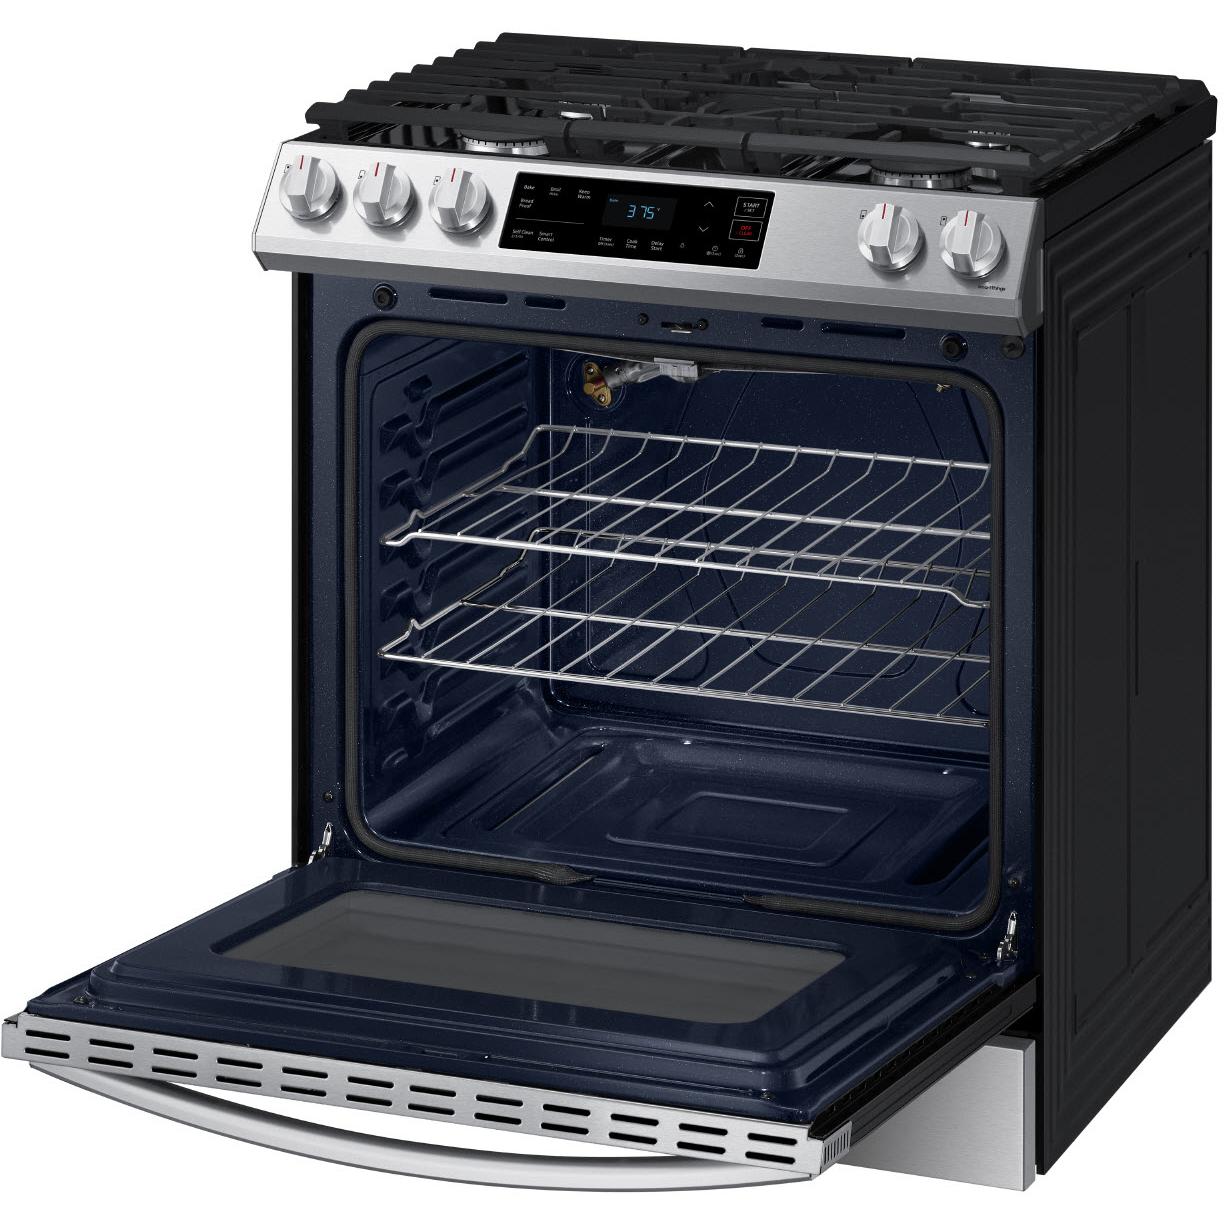 Samsung 30-inch Slide-in Gas Range with Wi-Fi Connect NX60T8111SS/AA